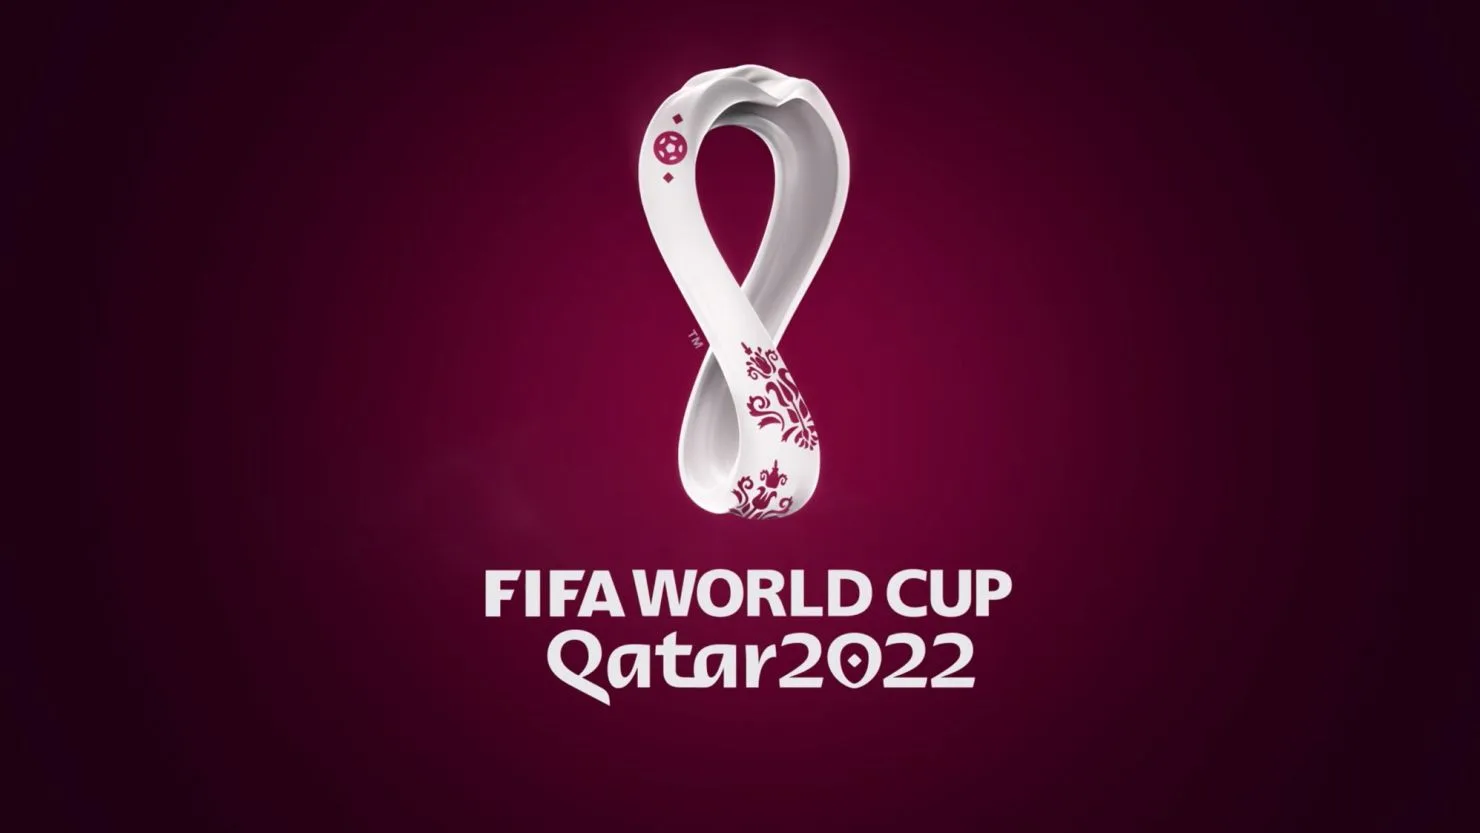 The 2022 FIFA World Cup in Qatar: Everything You Need to Know